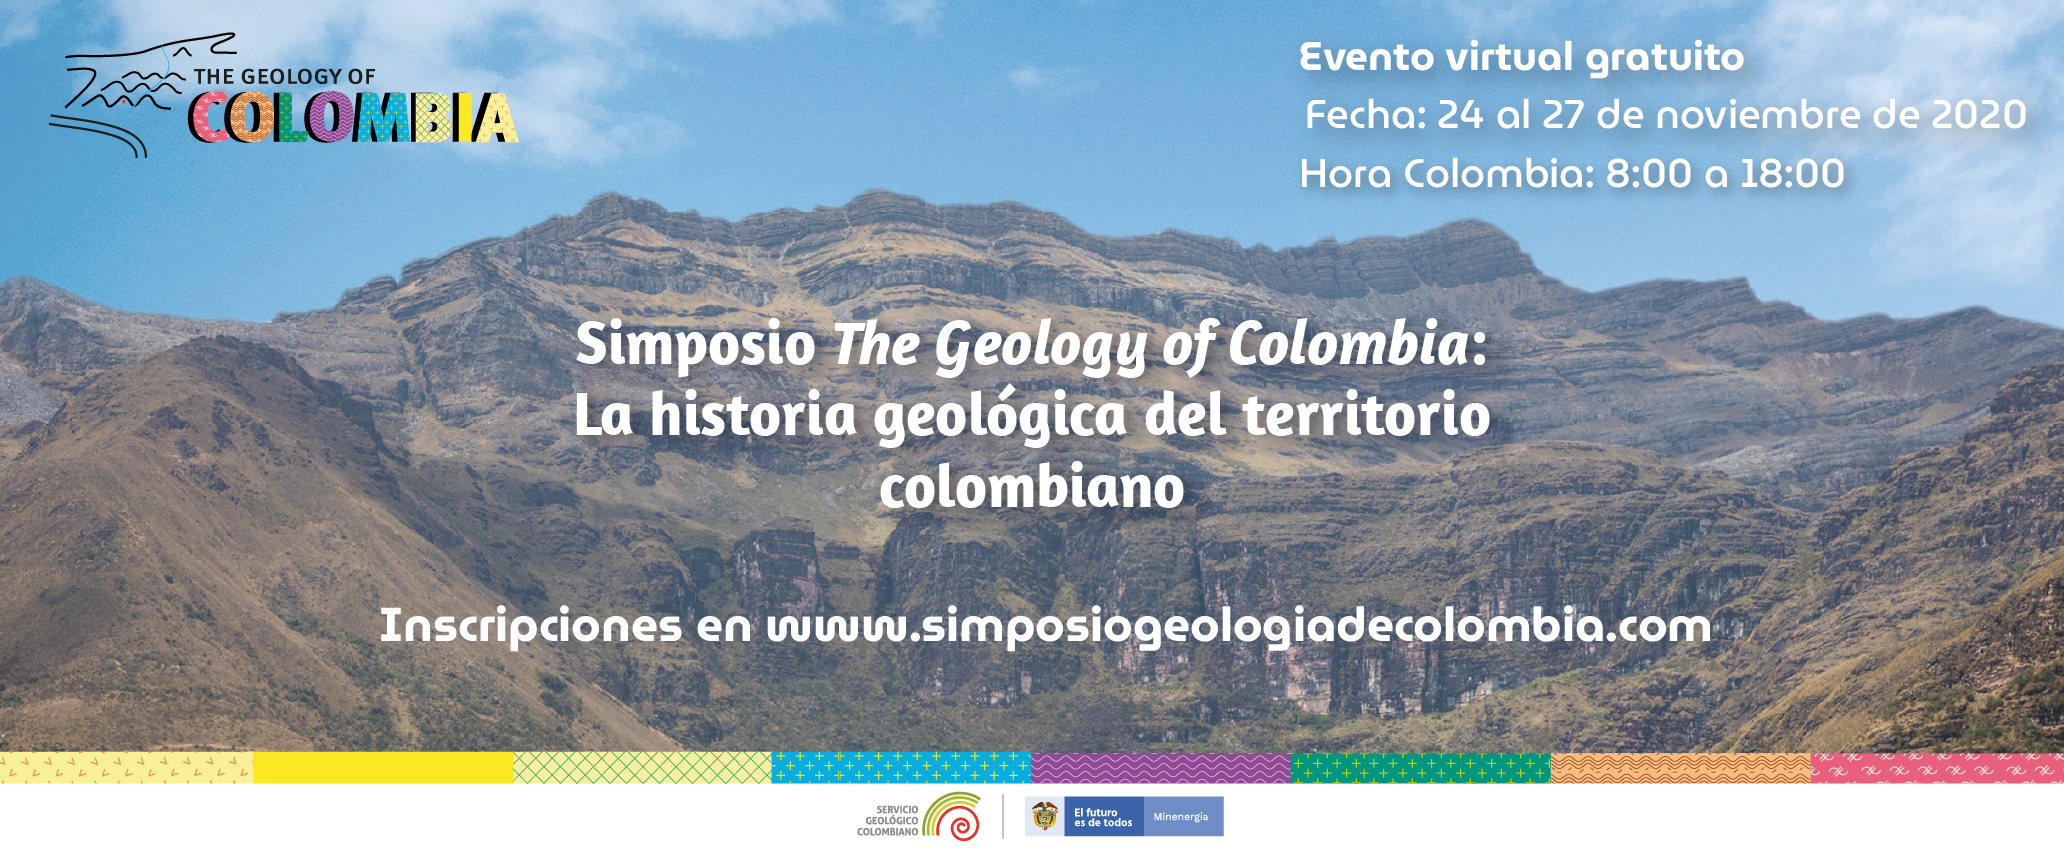 Simposio The Geology of Colombia